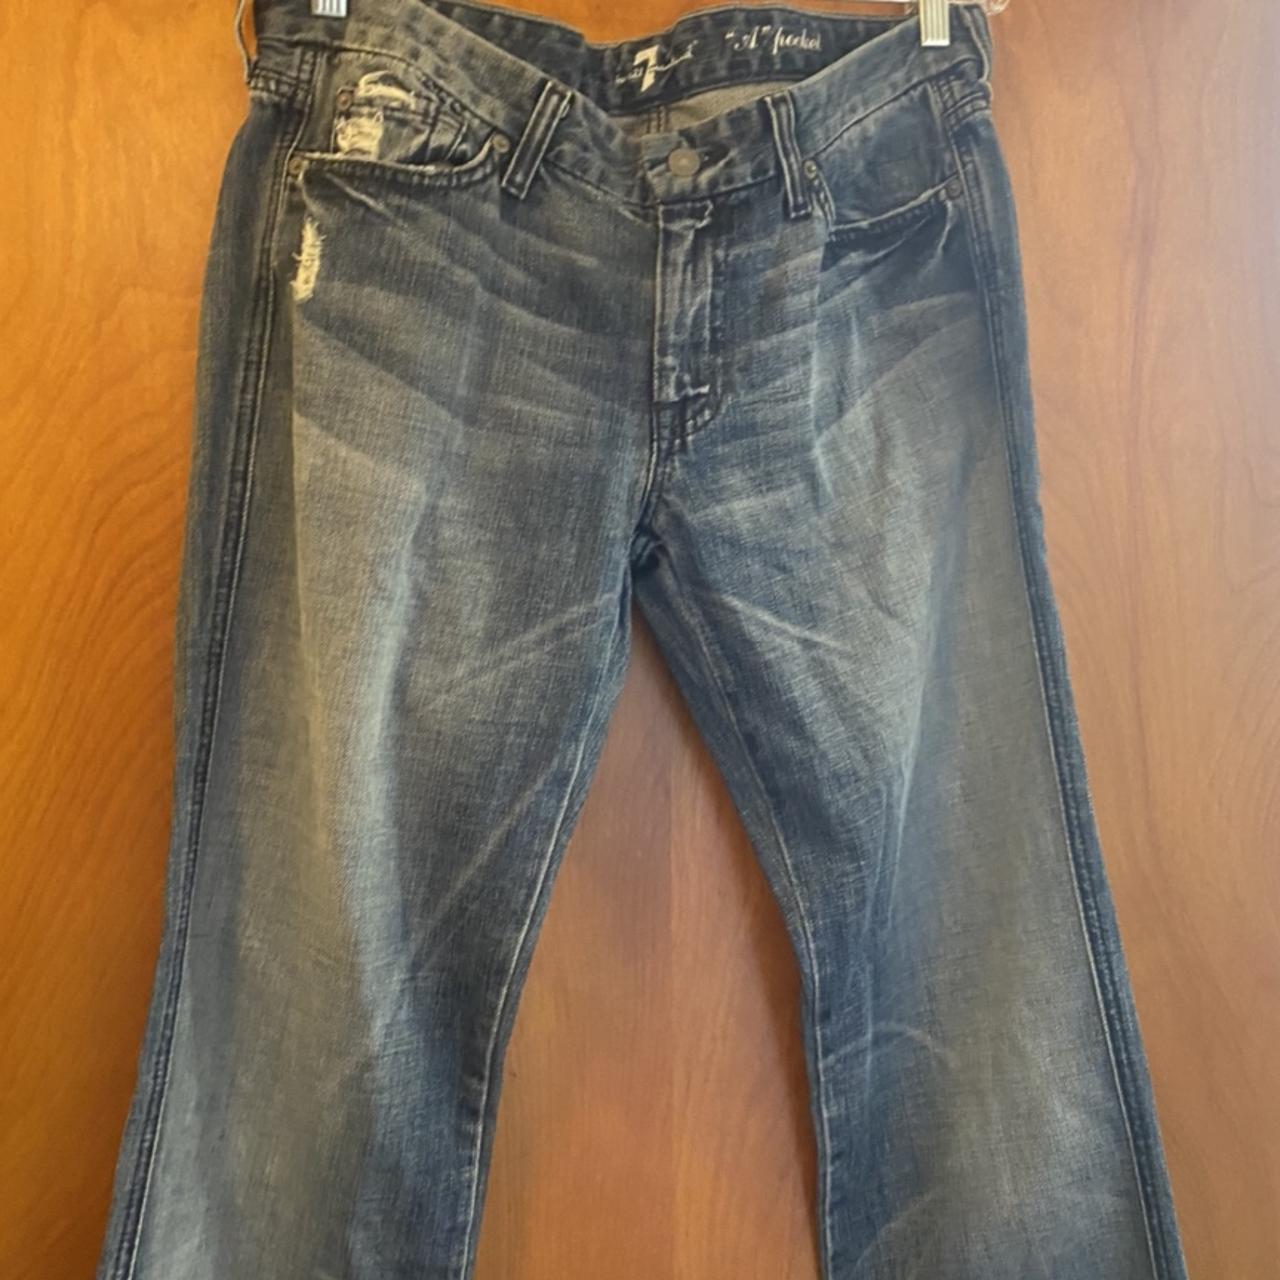 Product Image 2 - Distressed seven jeans with original